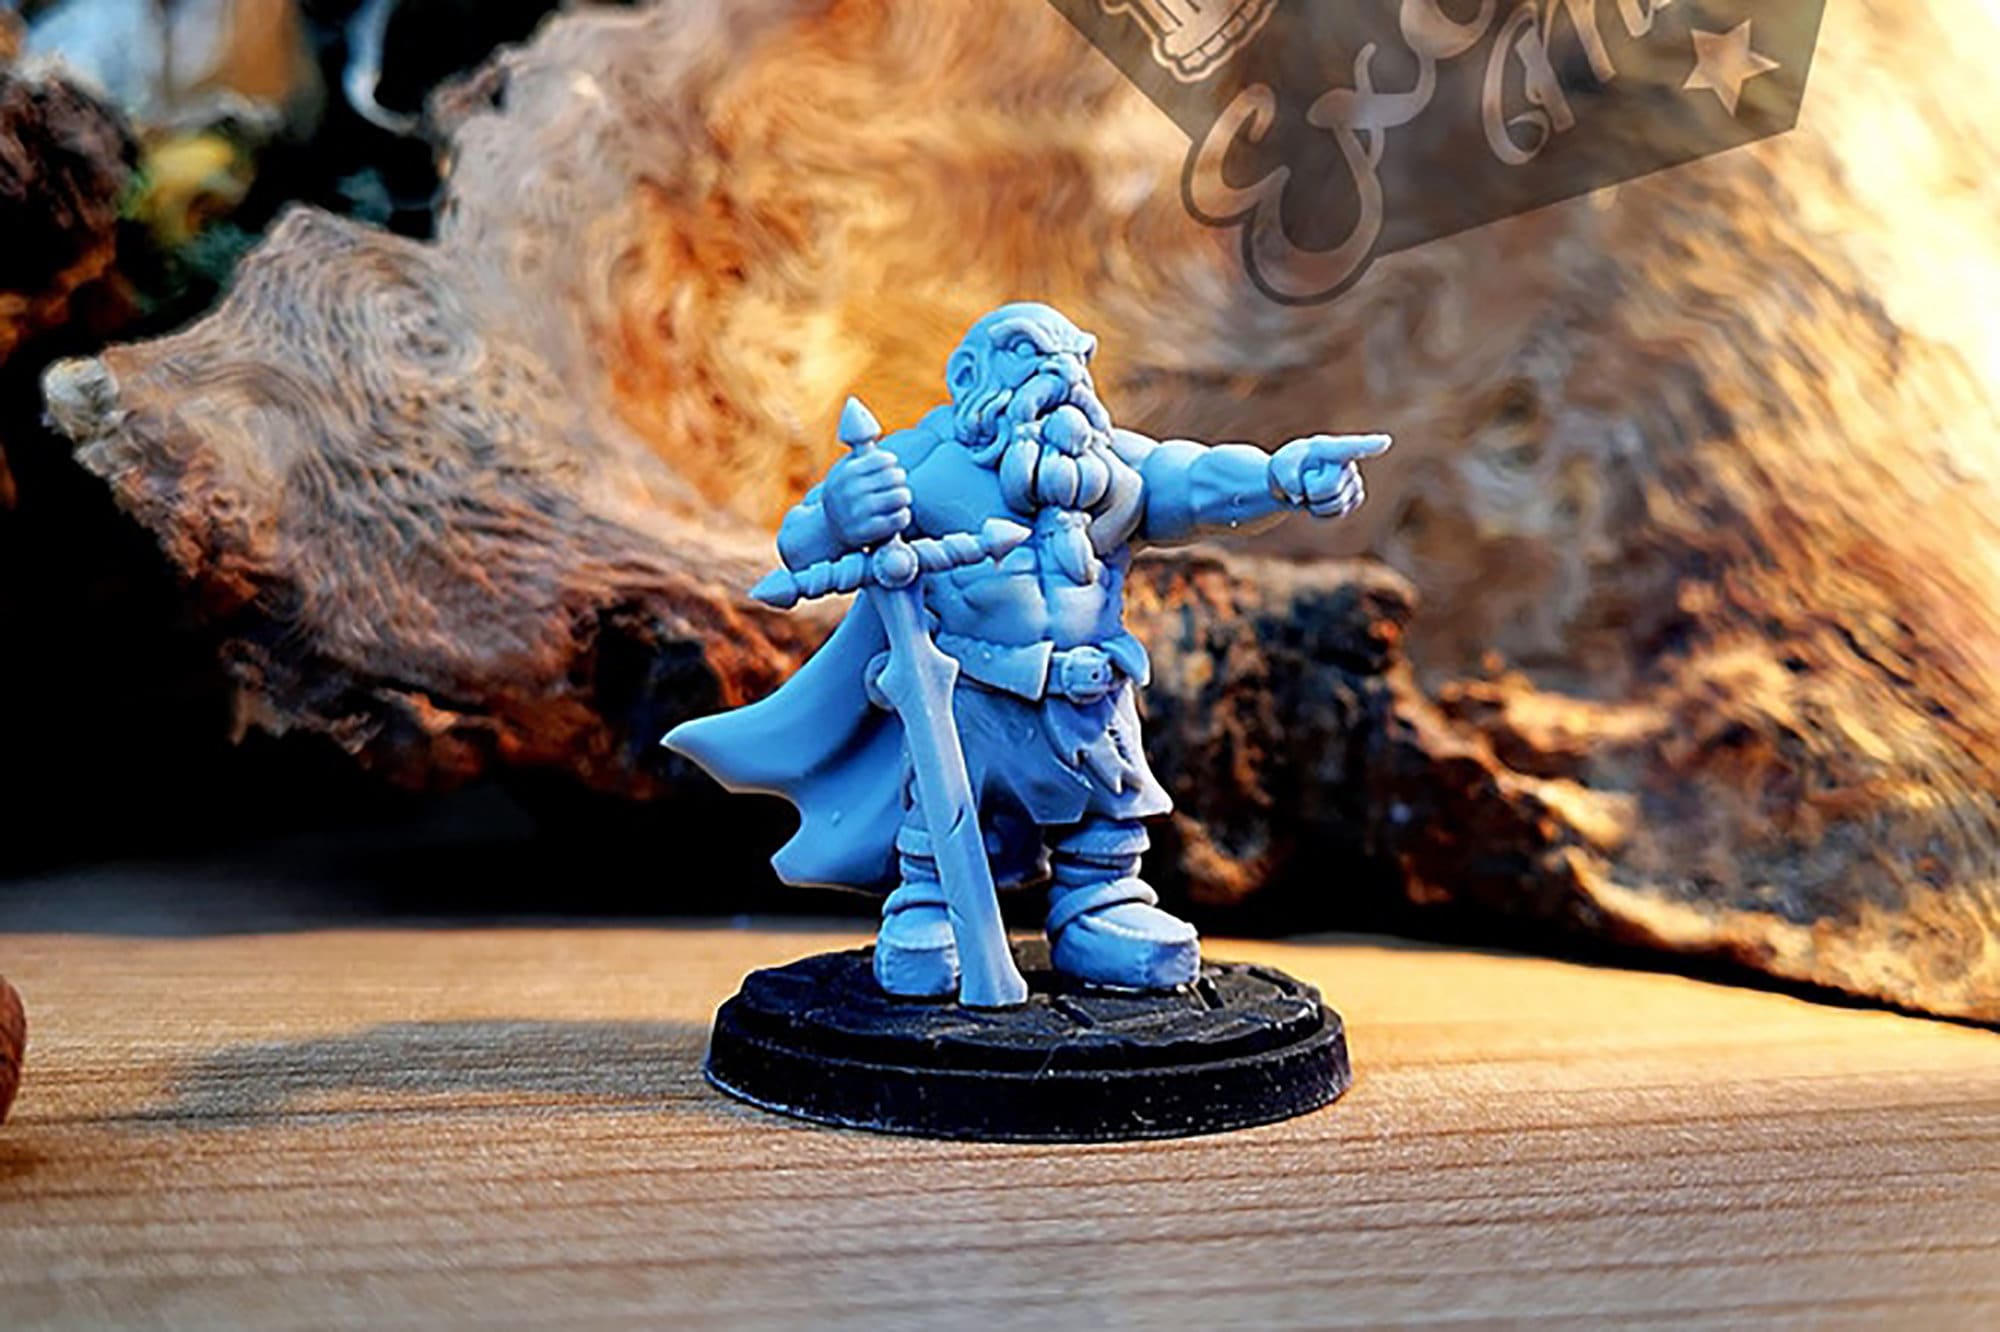 DWARF BARBARIAN (M) "Nurin the averse" | Dungeons and Dragons | DnD | Pathfinder | Tabletop | RPG | Hero Size | 28 mm-Role Playing Miniatures